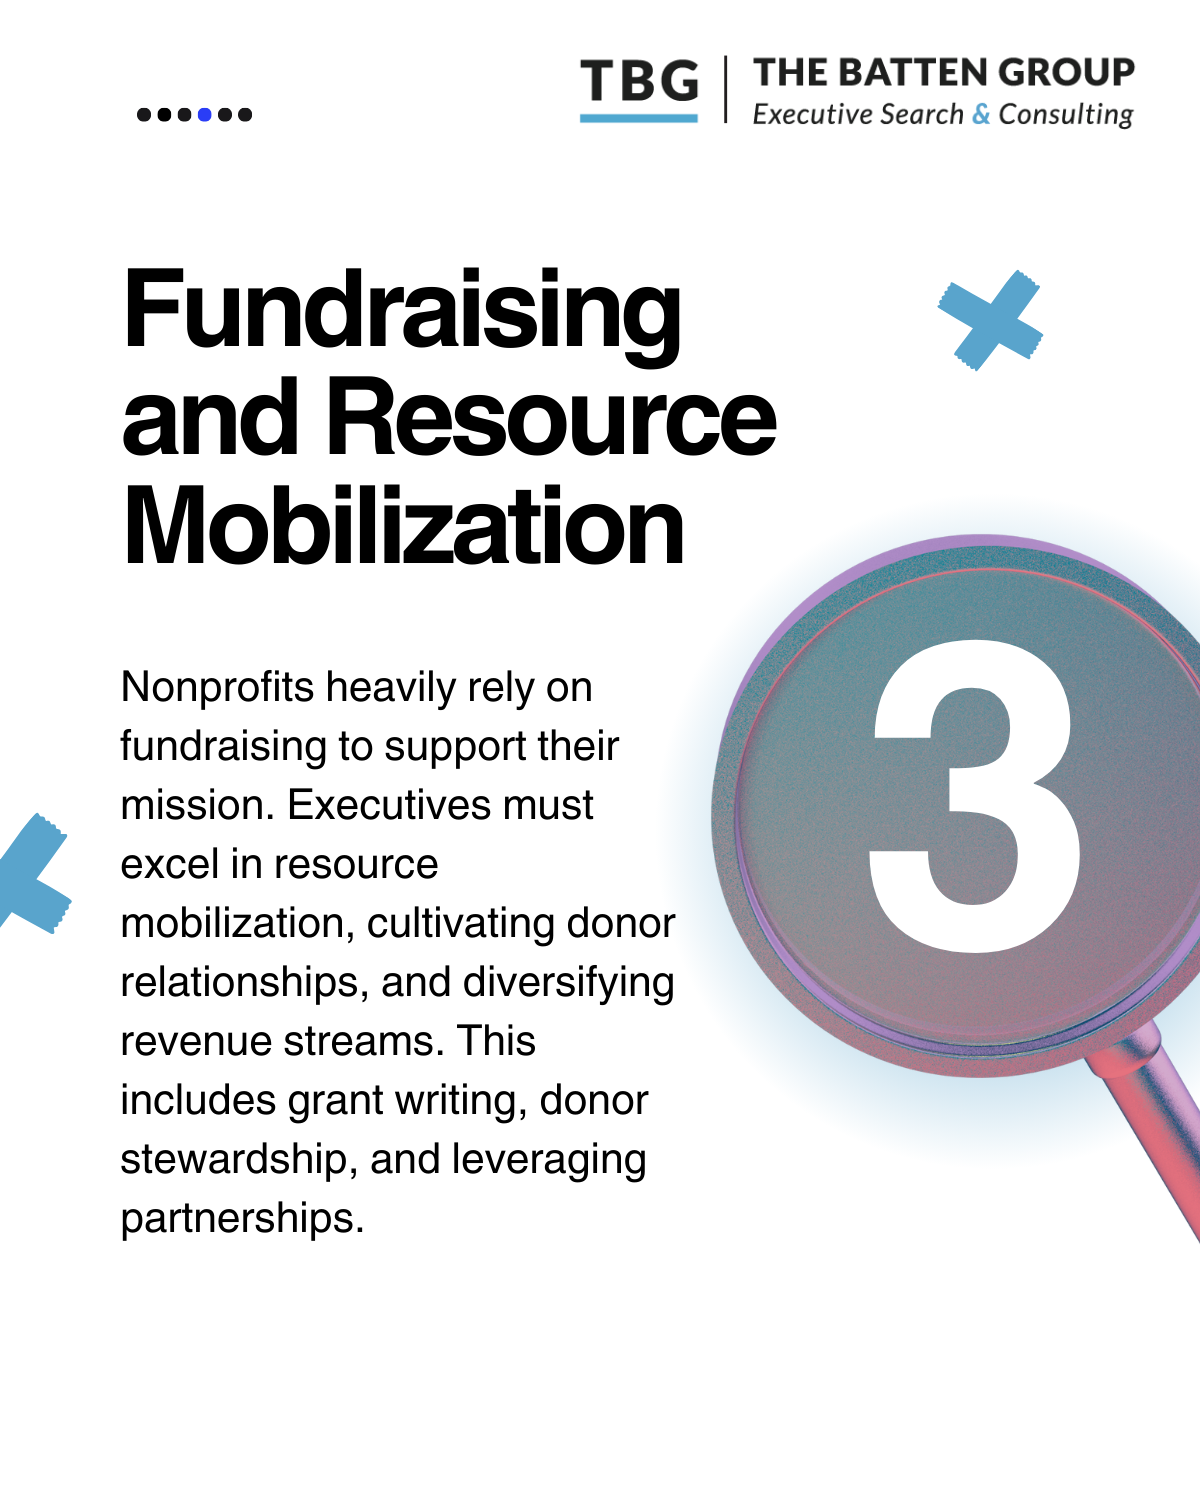 Fundraising and Resource Mobilization